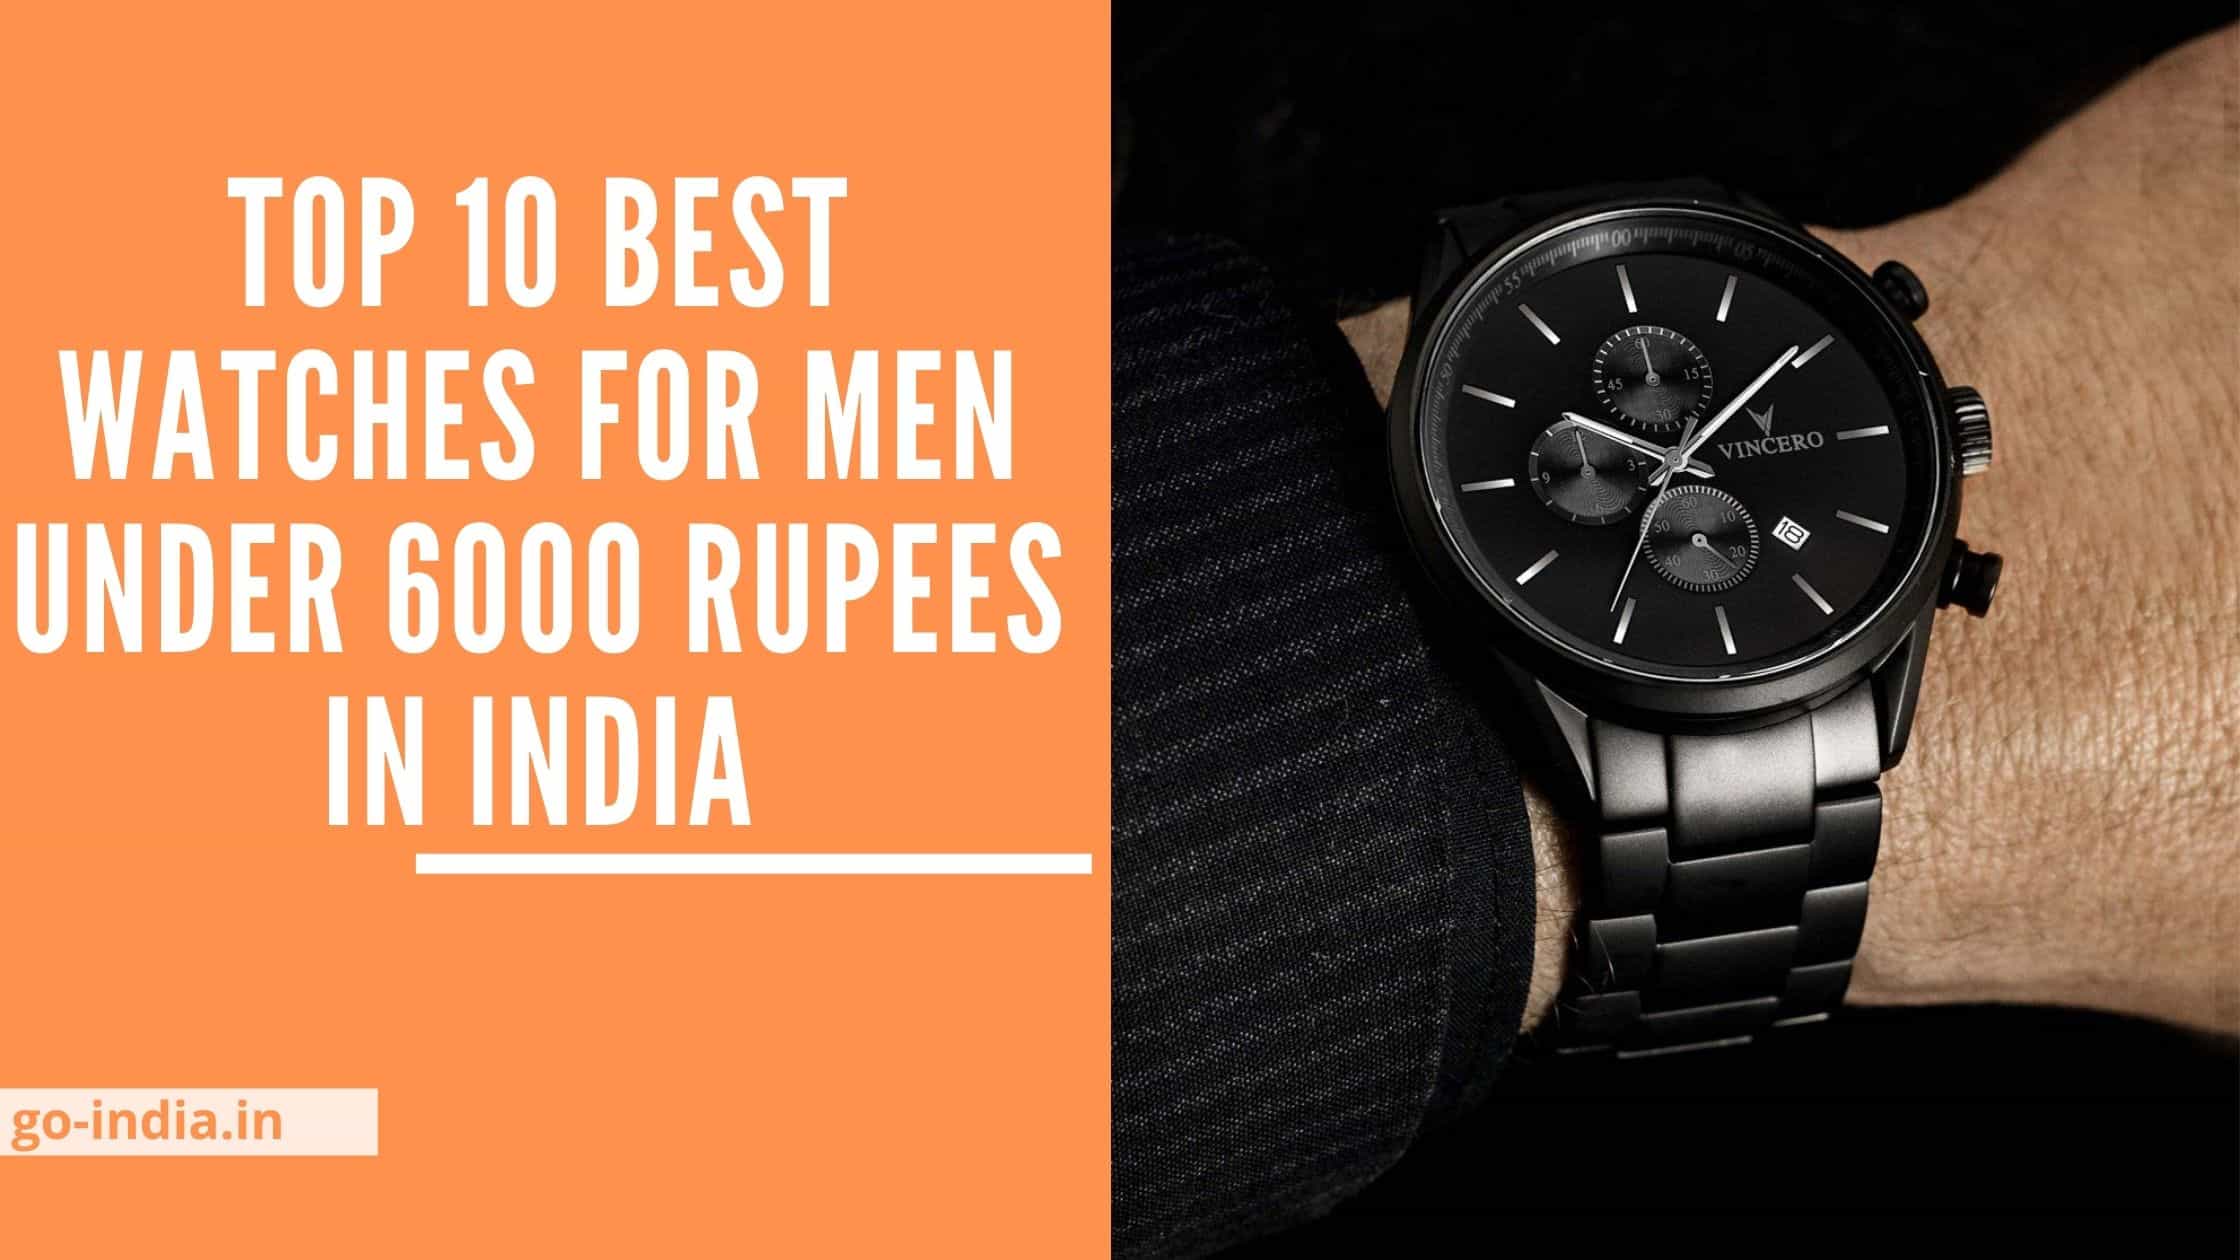 Top 10 Best Watches For Men Under 6000 Rupees in India